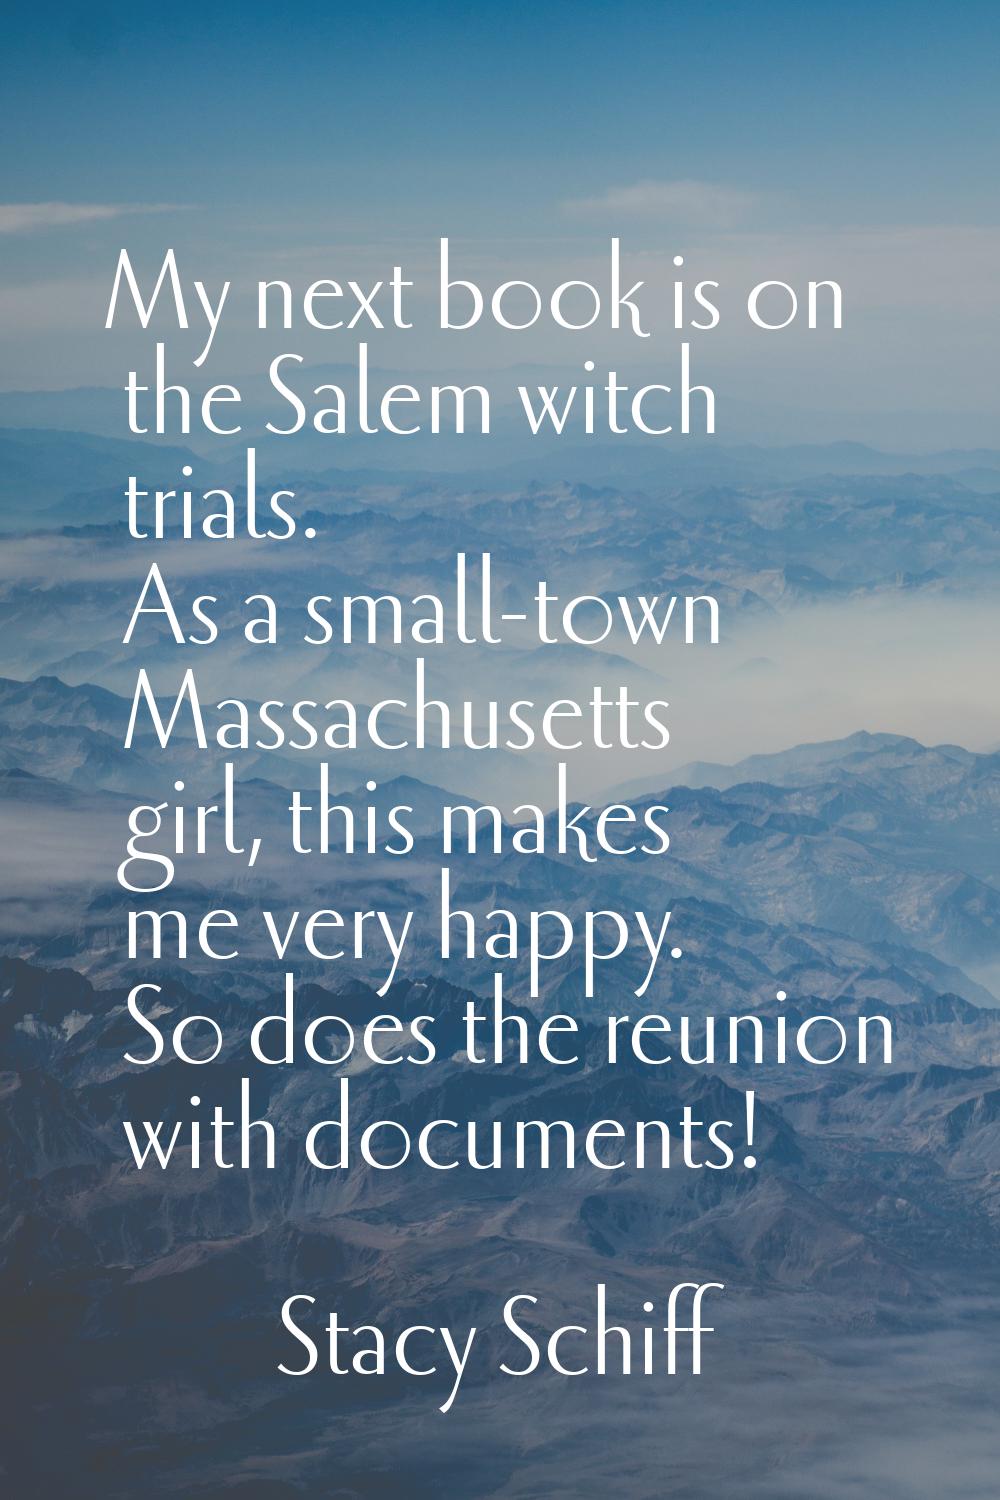 My next book is on the Salem witch trials. As a small-town Massachusetts girl, this makes me very h